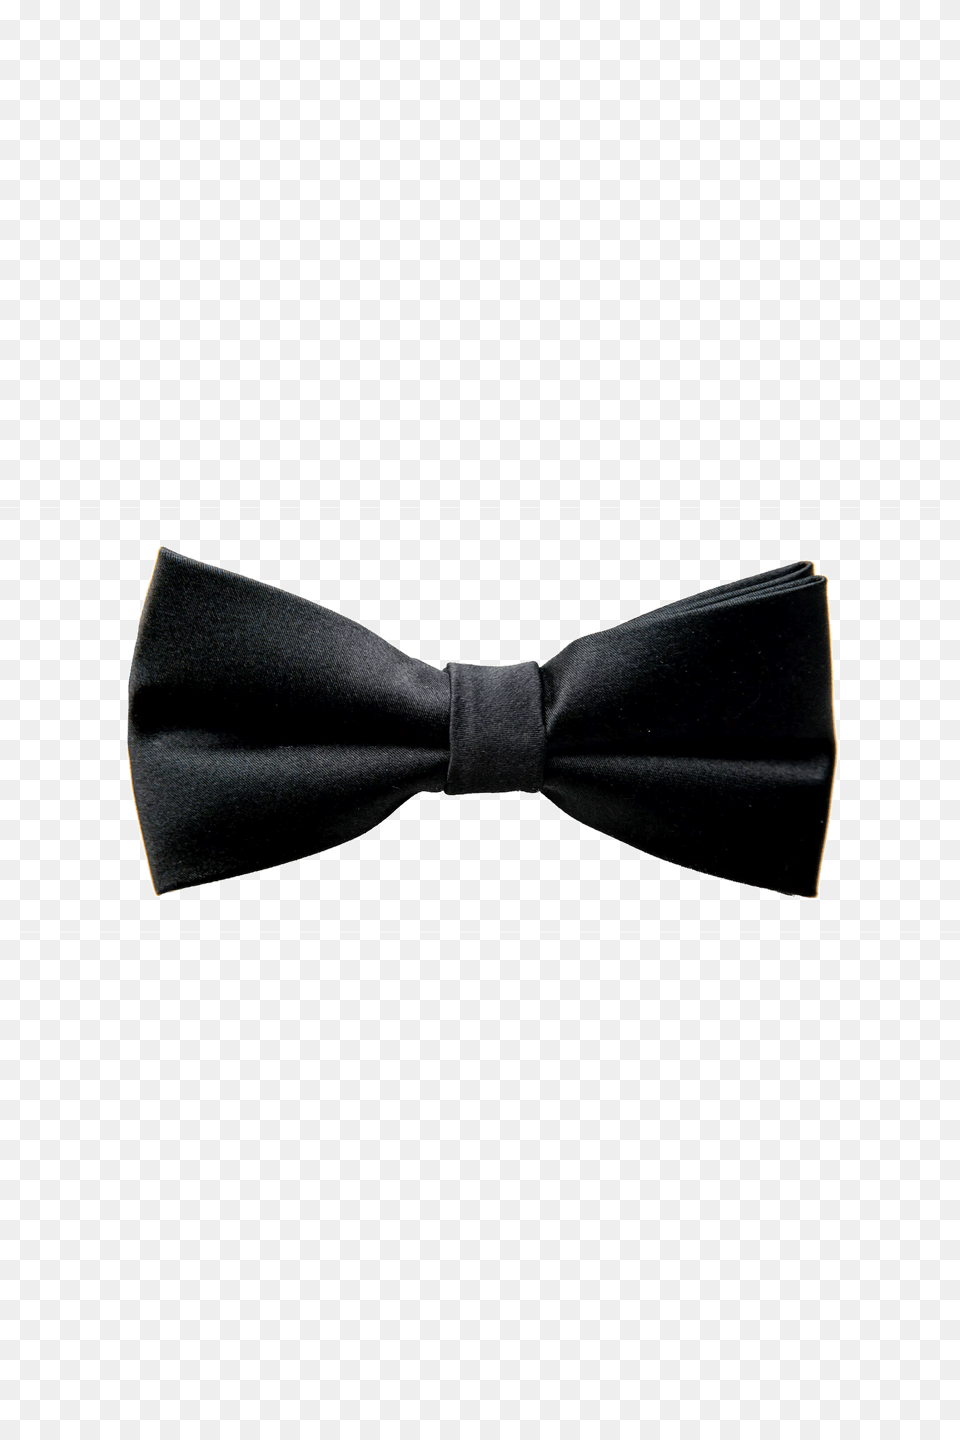 Get The Black Bow Tie In Black Online, Accessories, Formal Wear, Bow Tie, Smoke Pipe Free Transparent Png